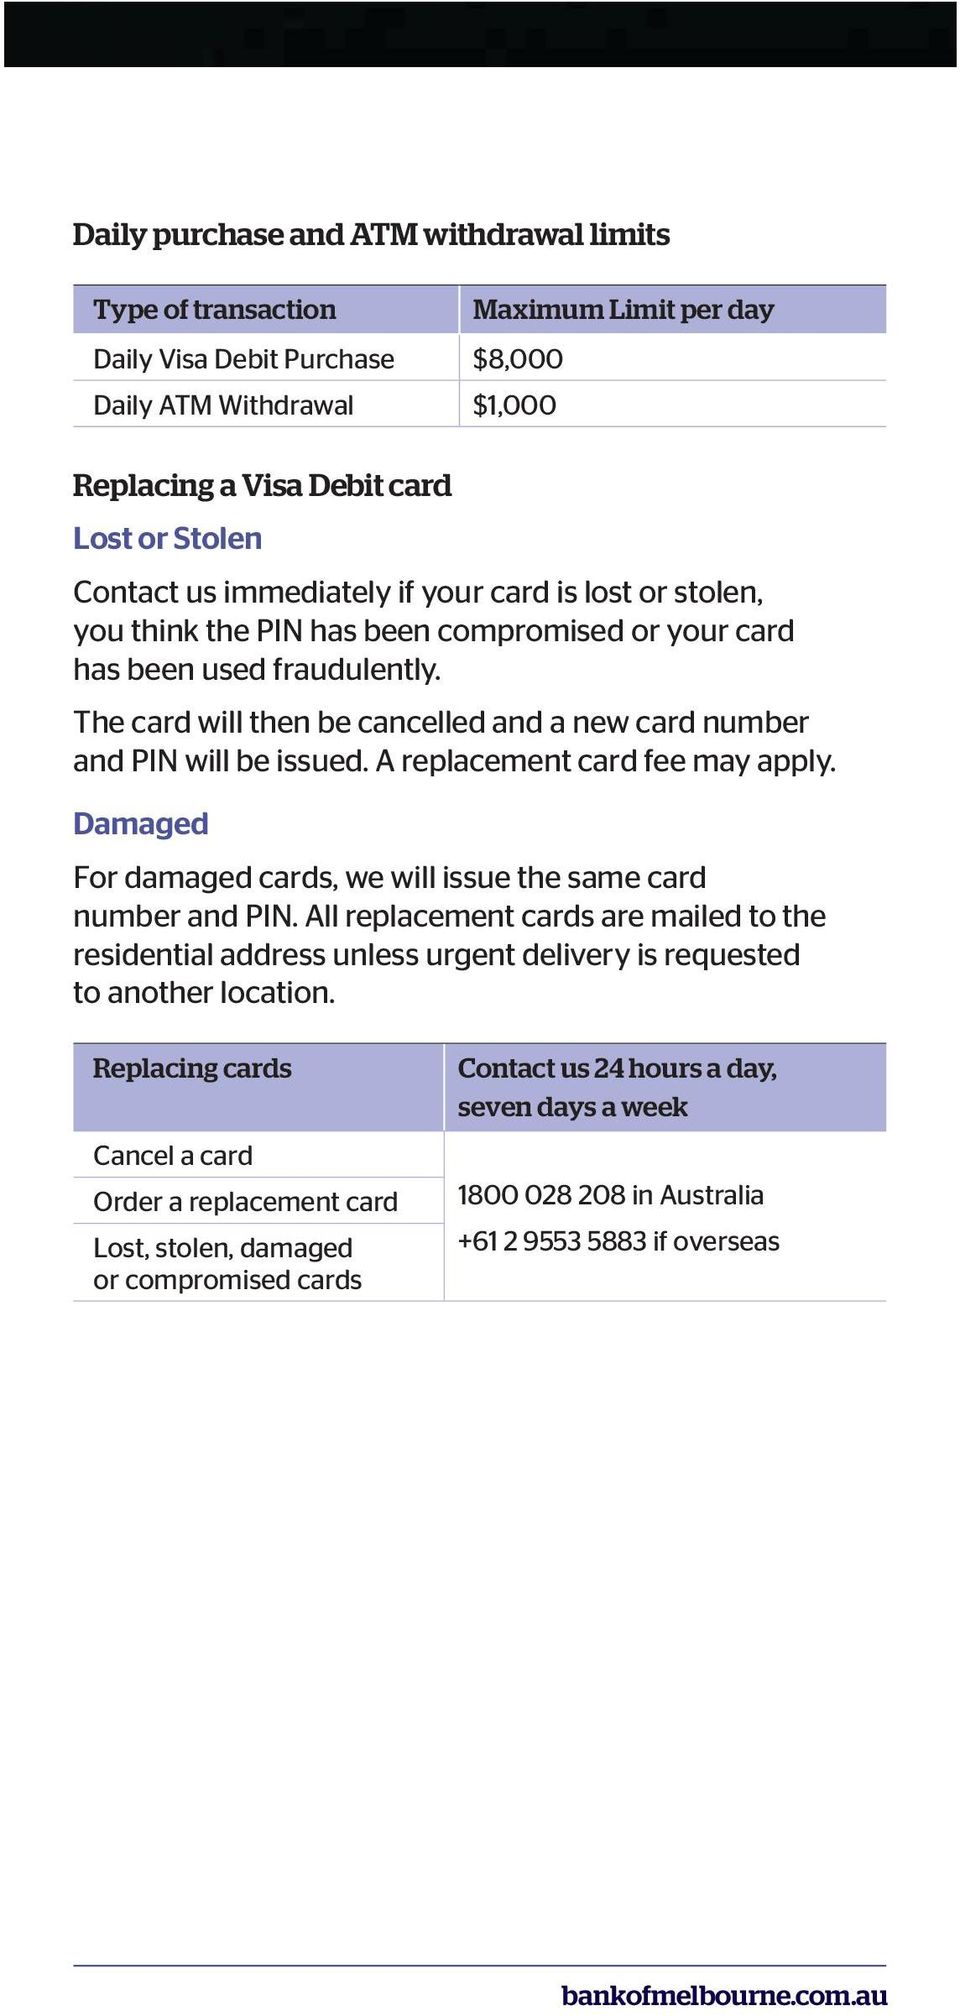 The card will then be cancelled and a new card number and PIN will be issued. A replacement card fee may apply. Damaged For damaged cards, we will issue the same card number and PIN.